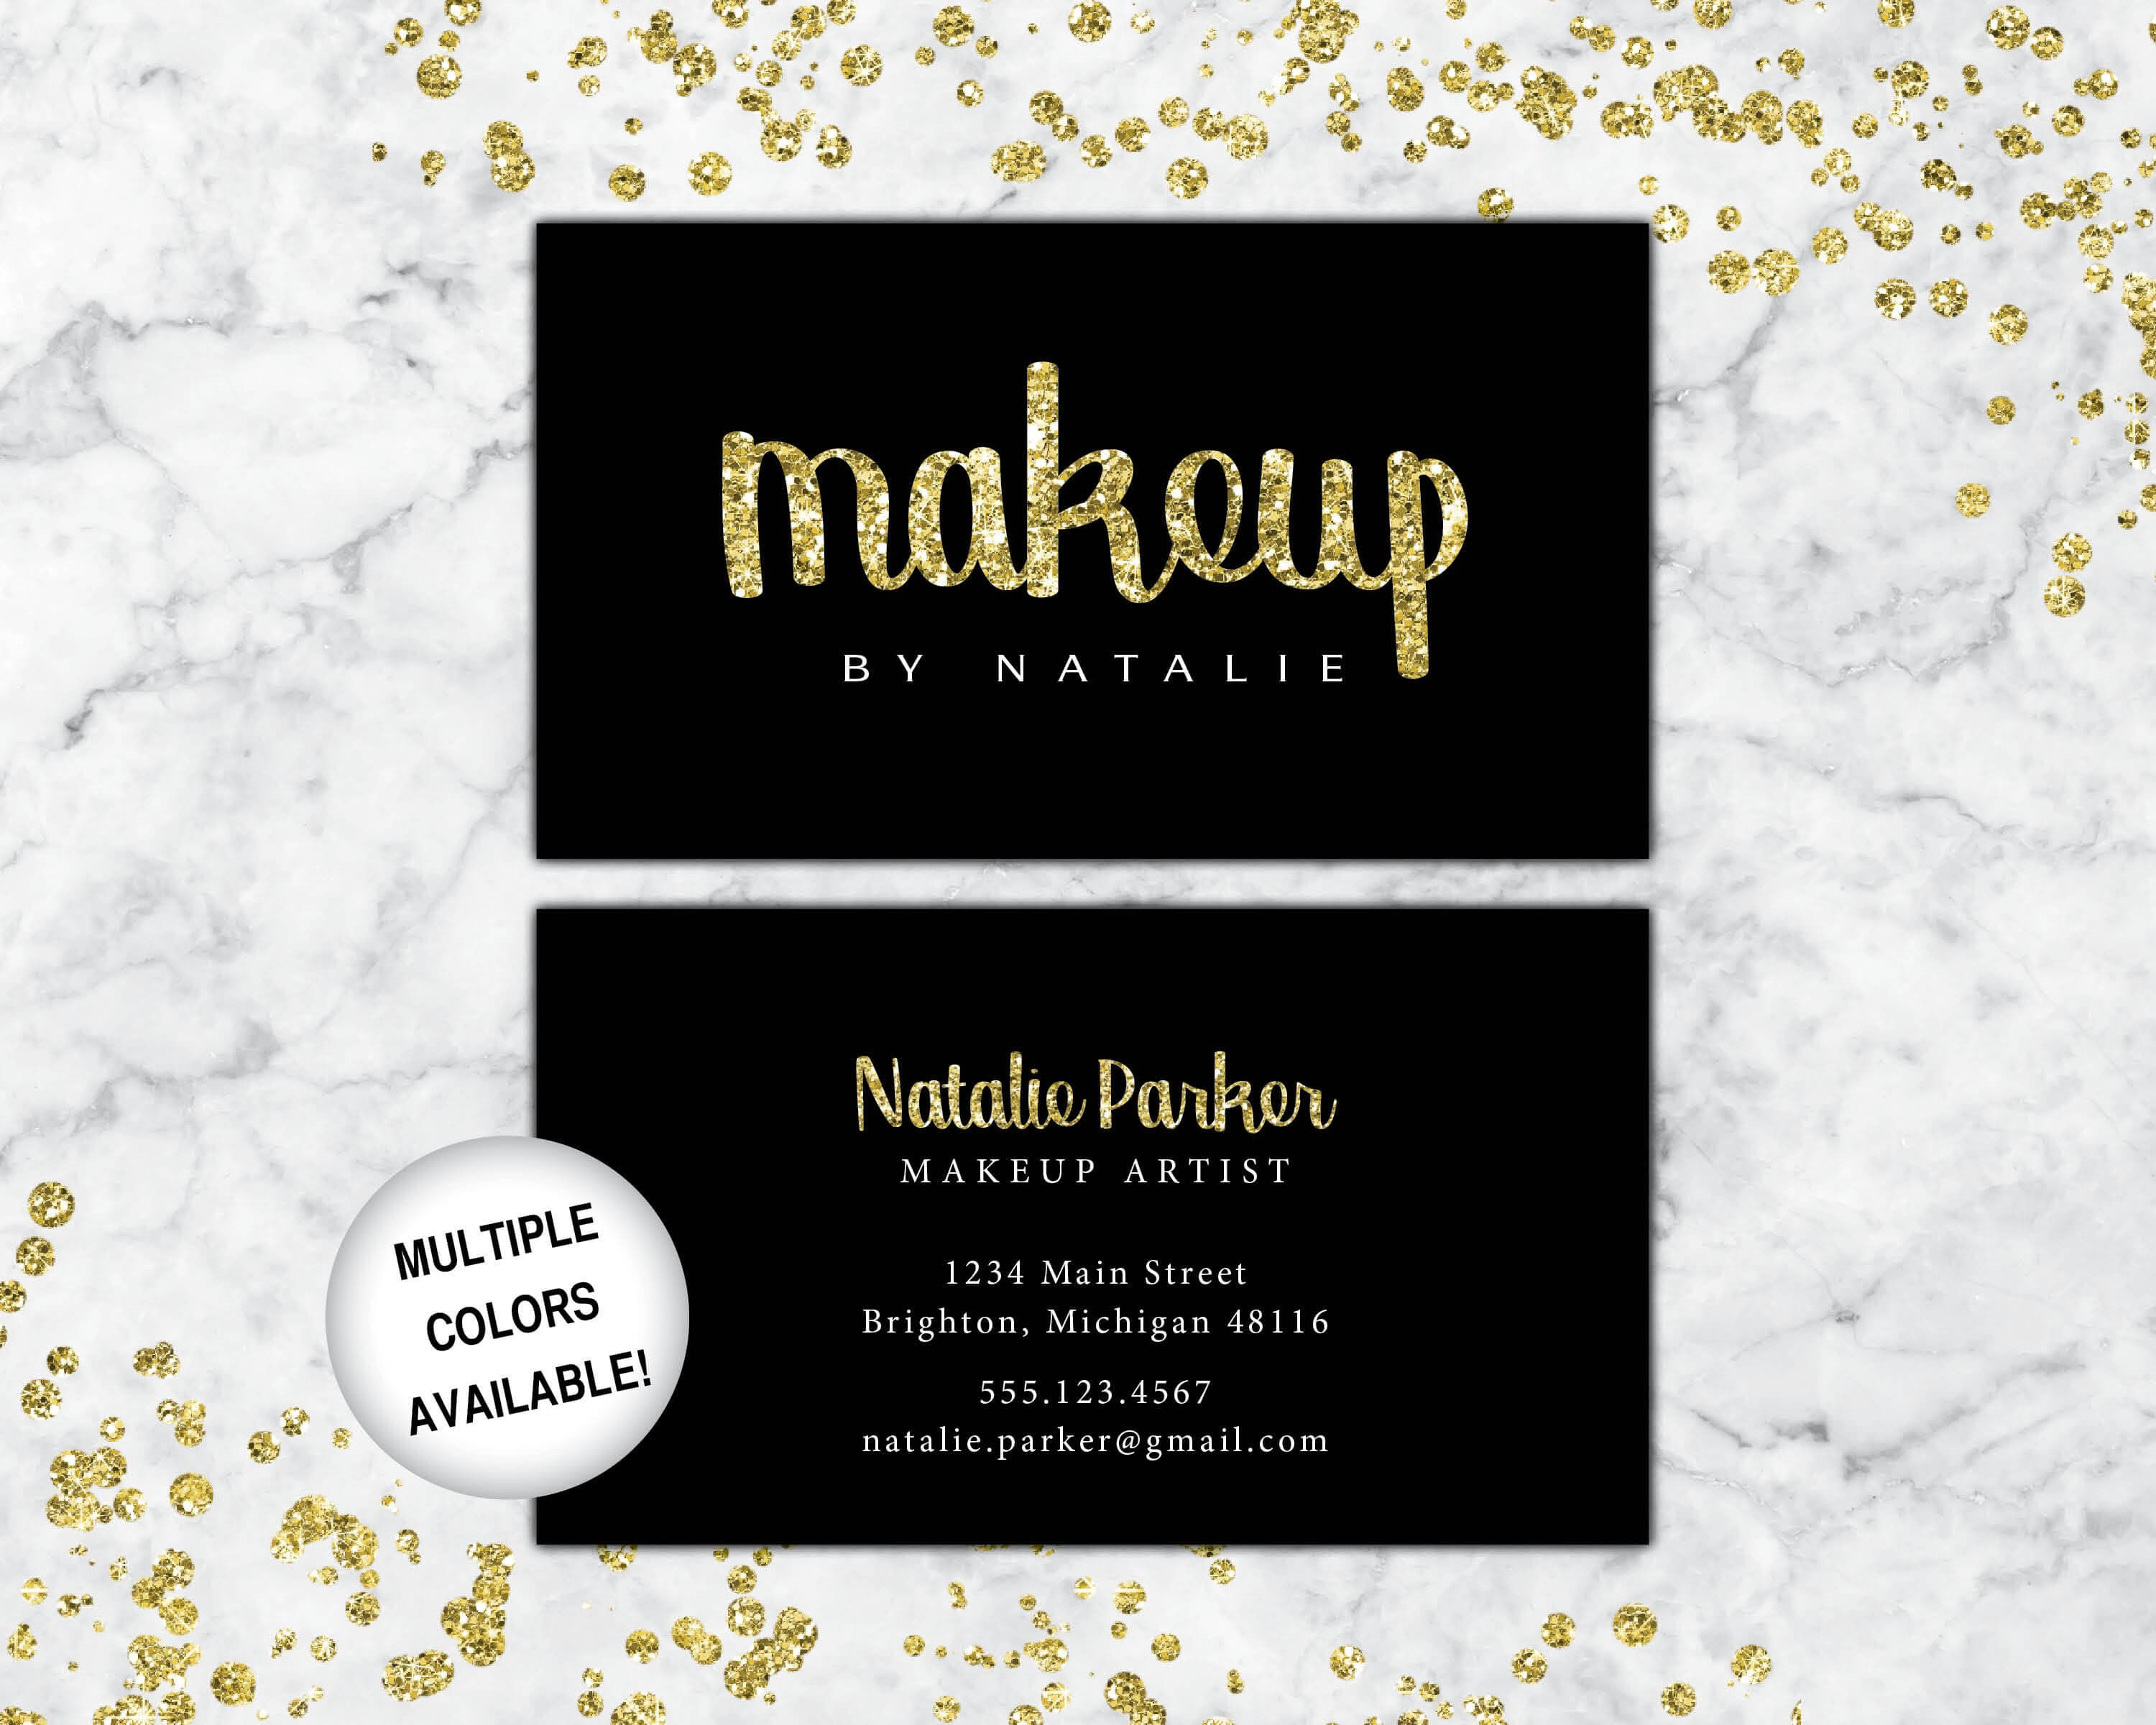 Makeup Artist Business Cards Ideas Hair And Best Free Pertaining To Christian Business Cards Templates Free